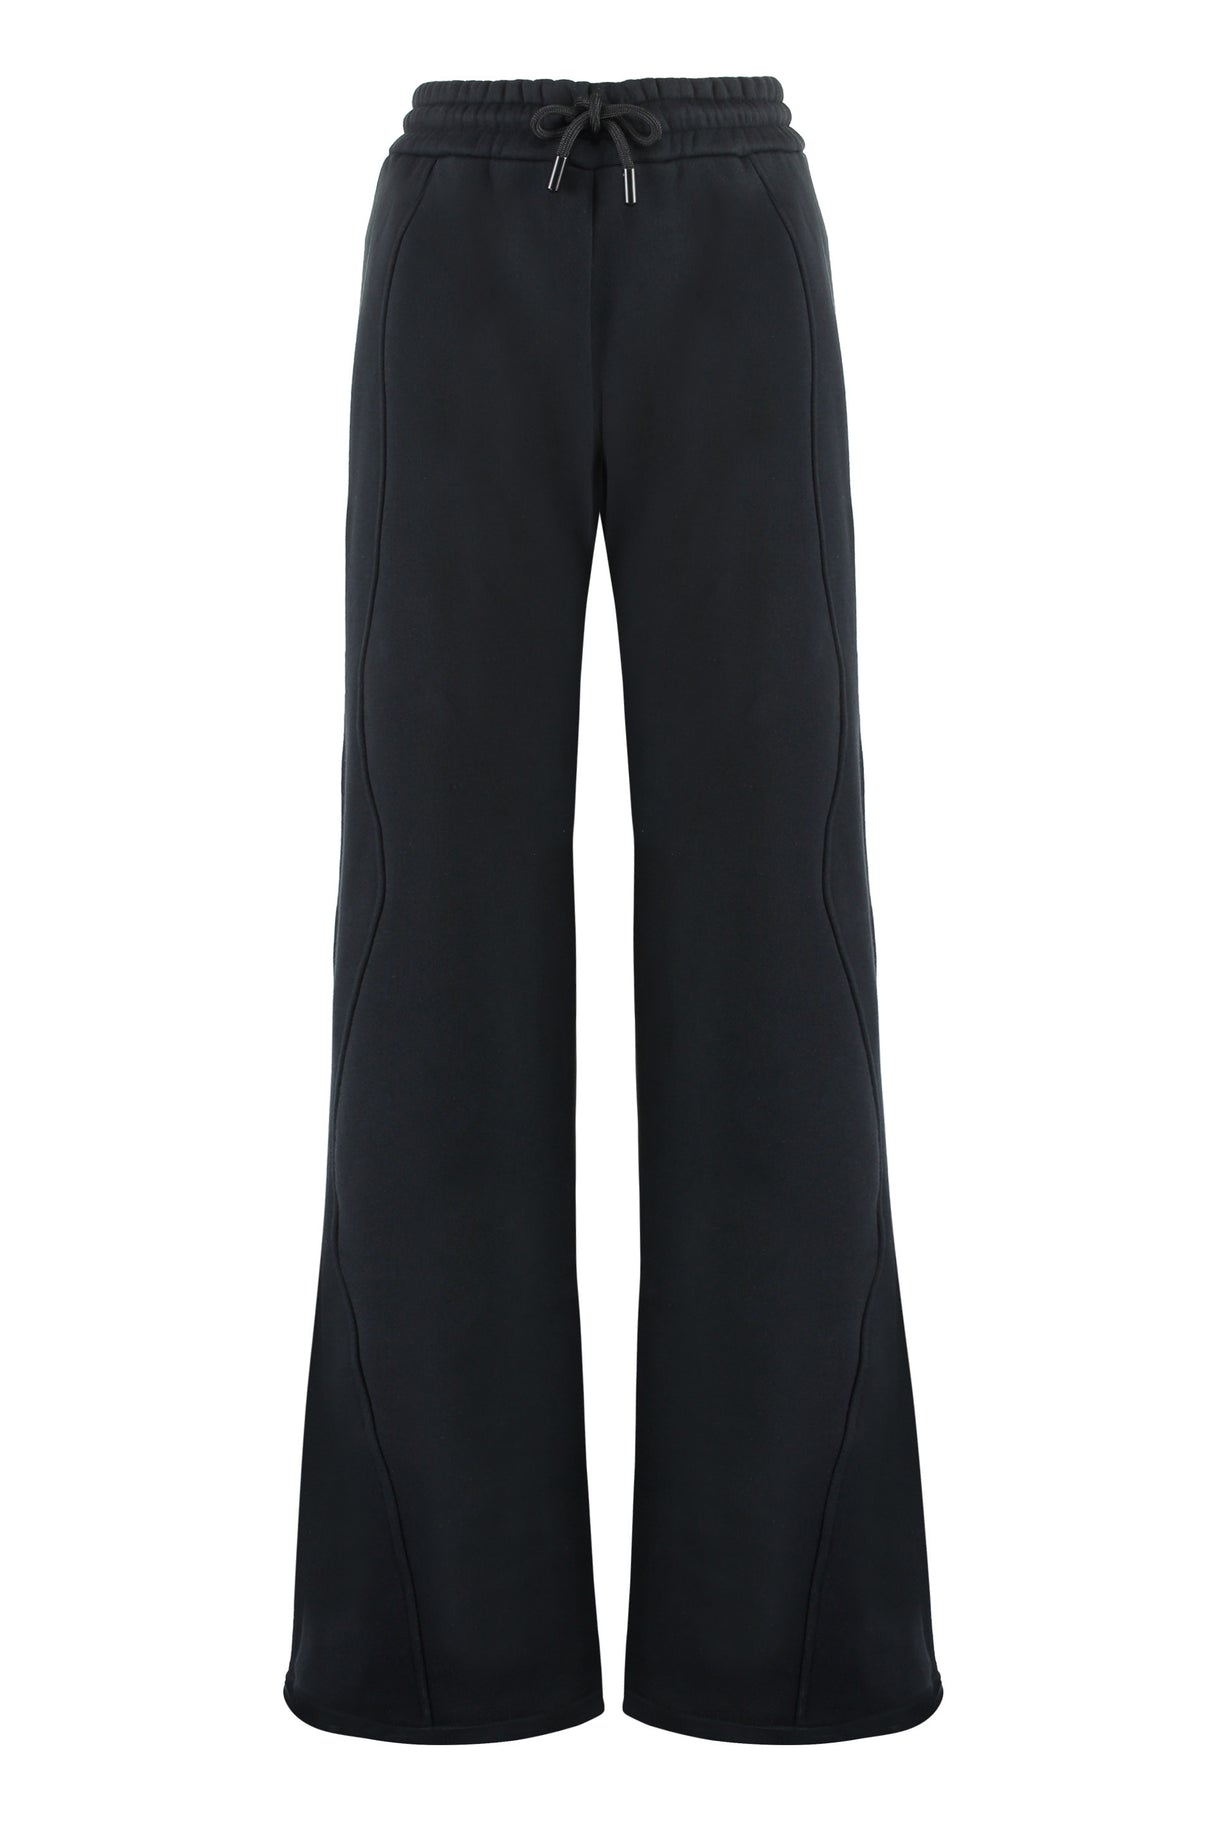 OFF-WHITE Piping-Detail Cotton Track Pants for Women